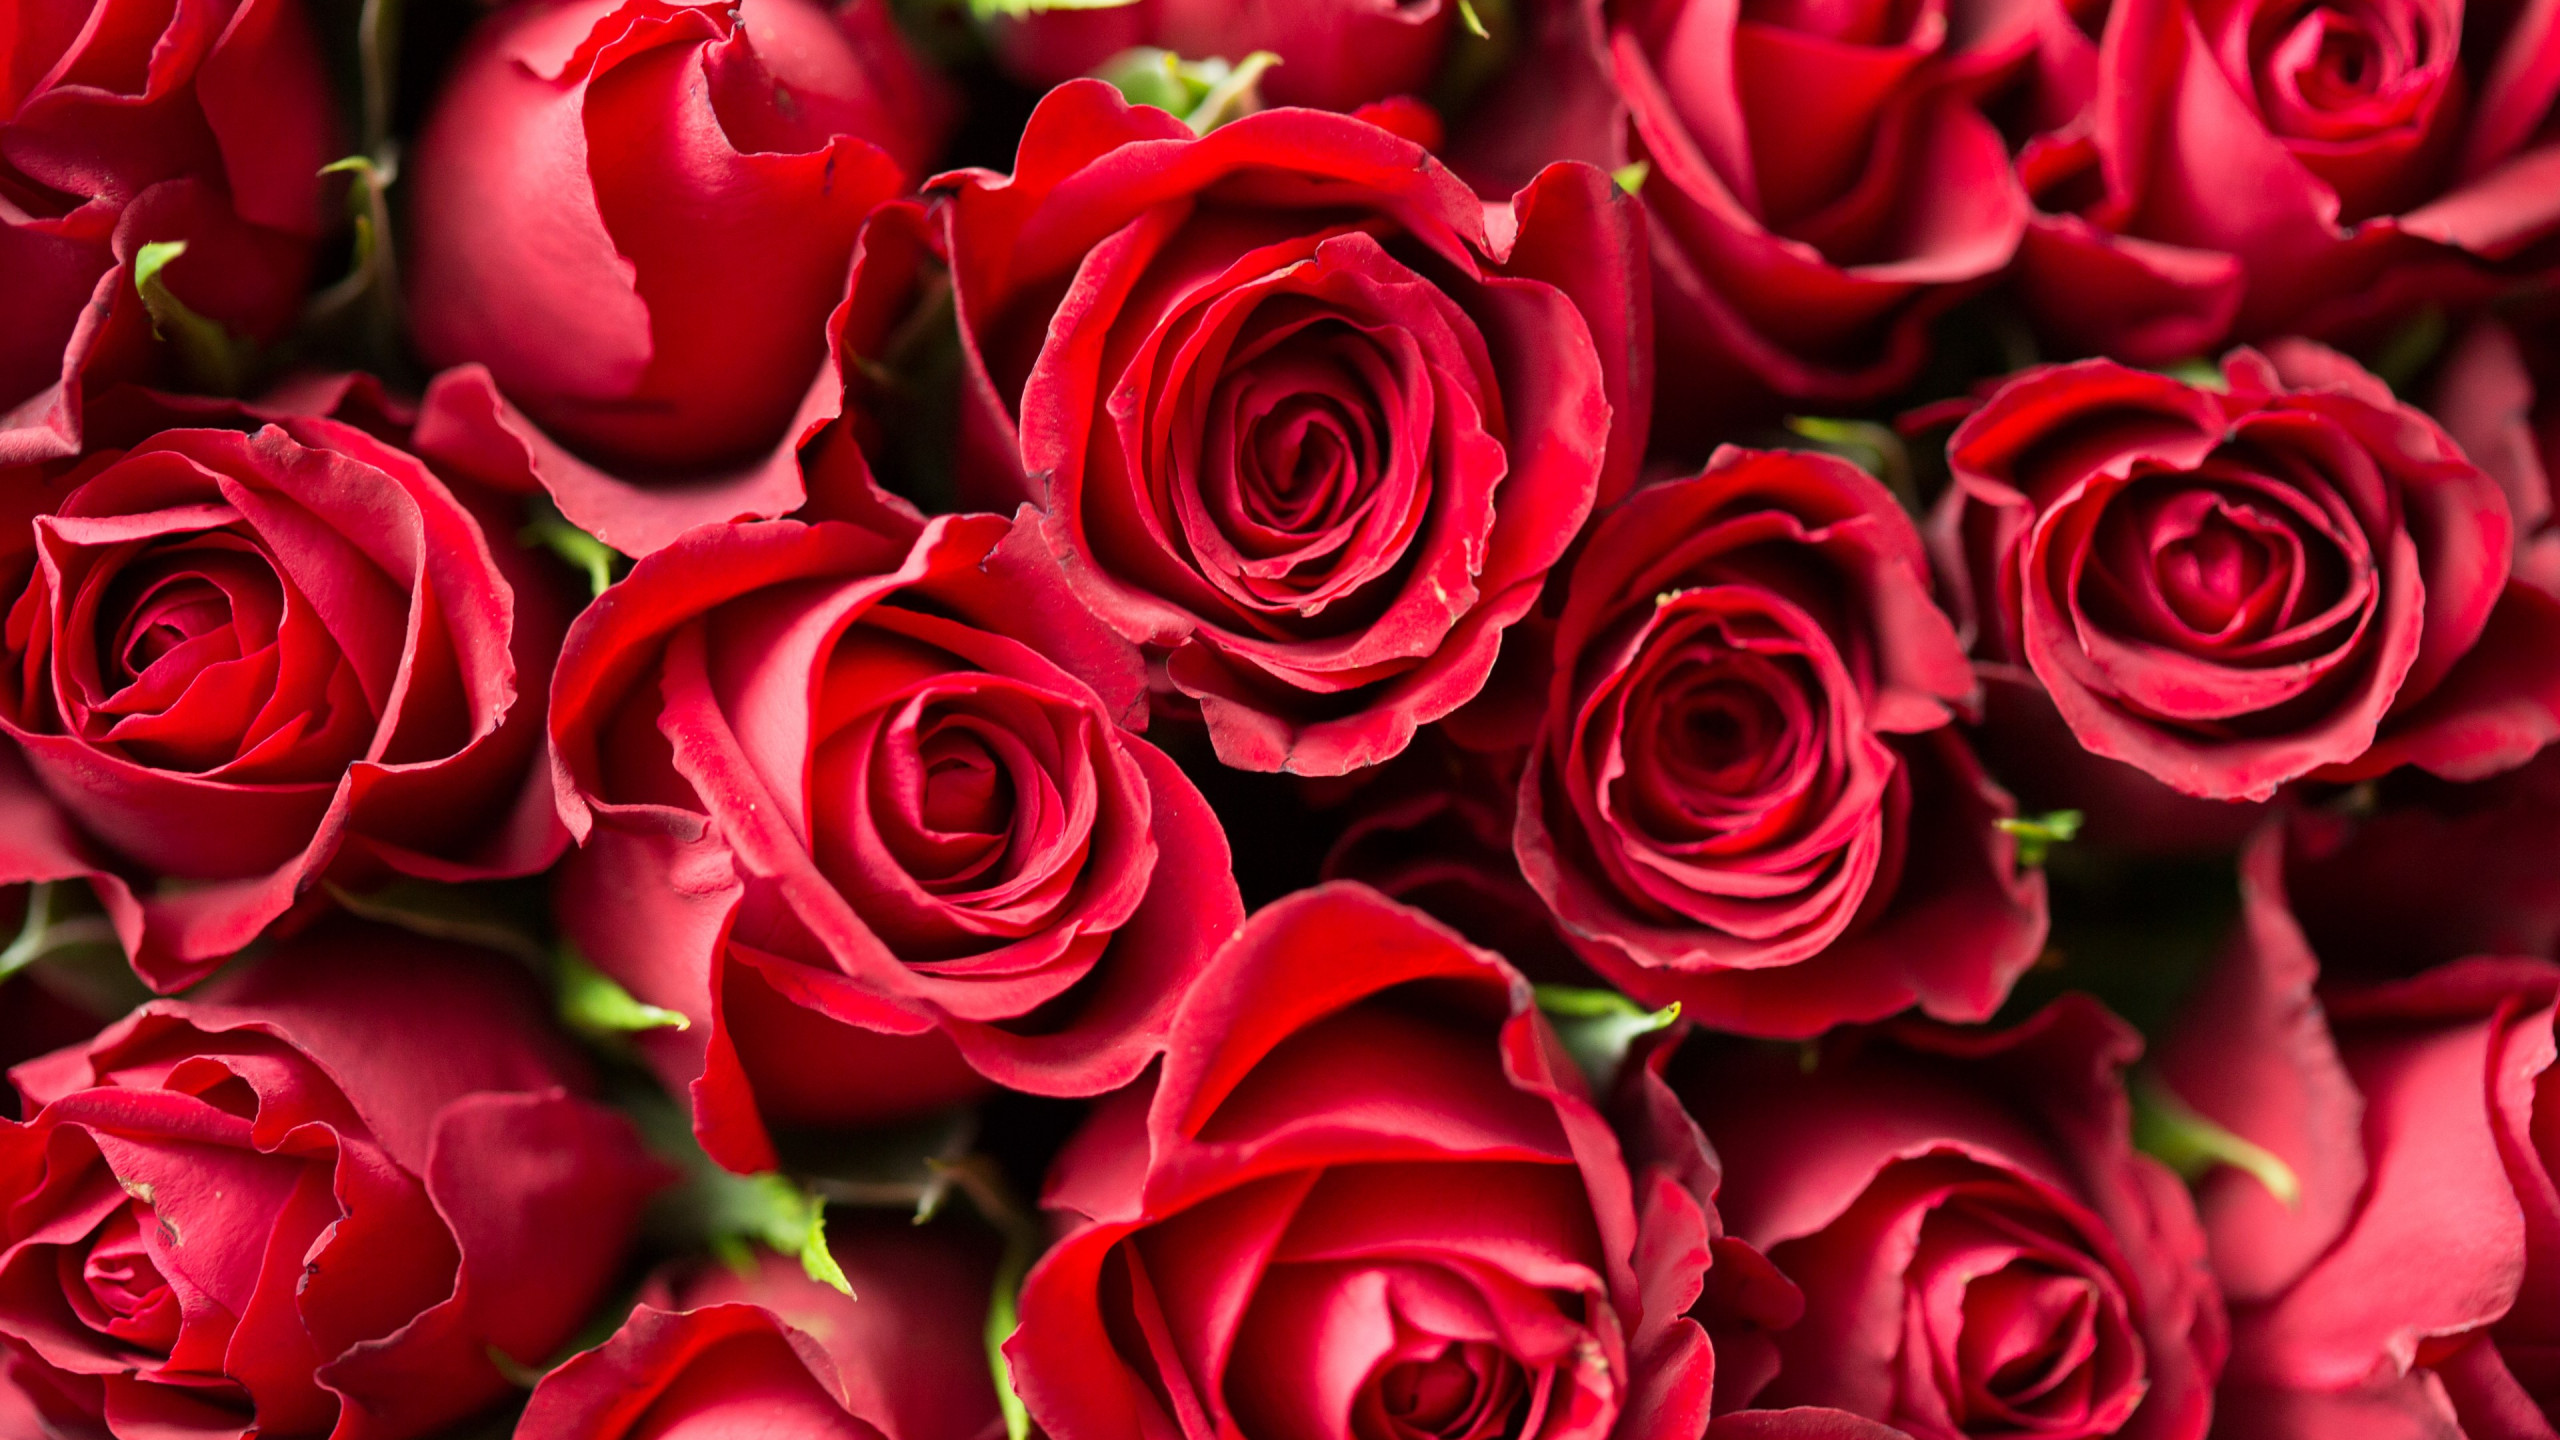 Lots of red roses wallpaper 2560x1440